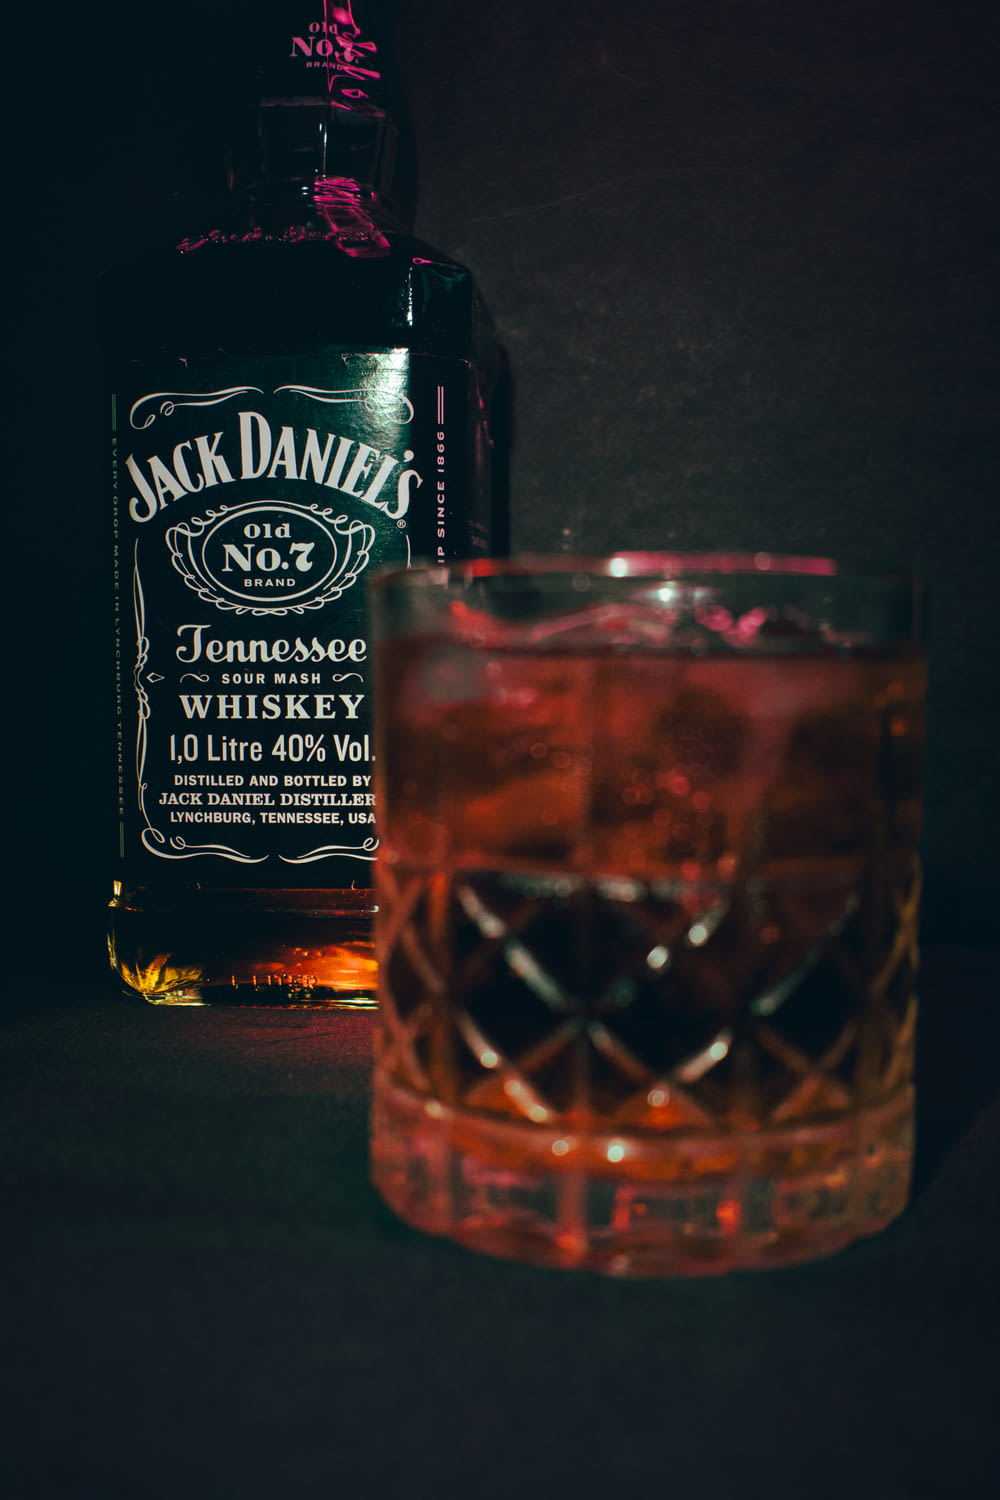 a glass of whiskey next to a bottle of jack daniels